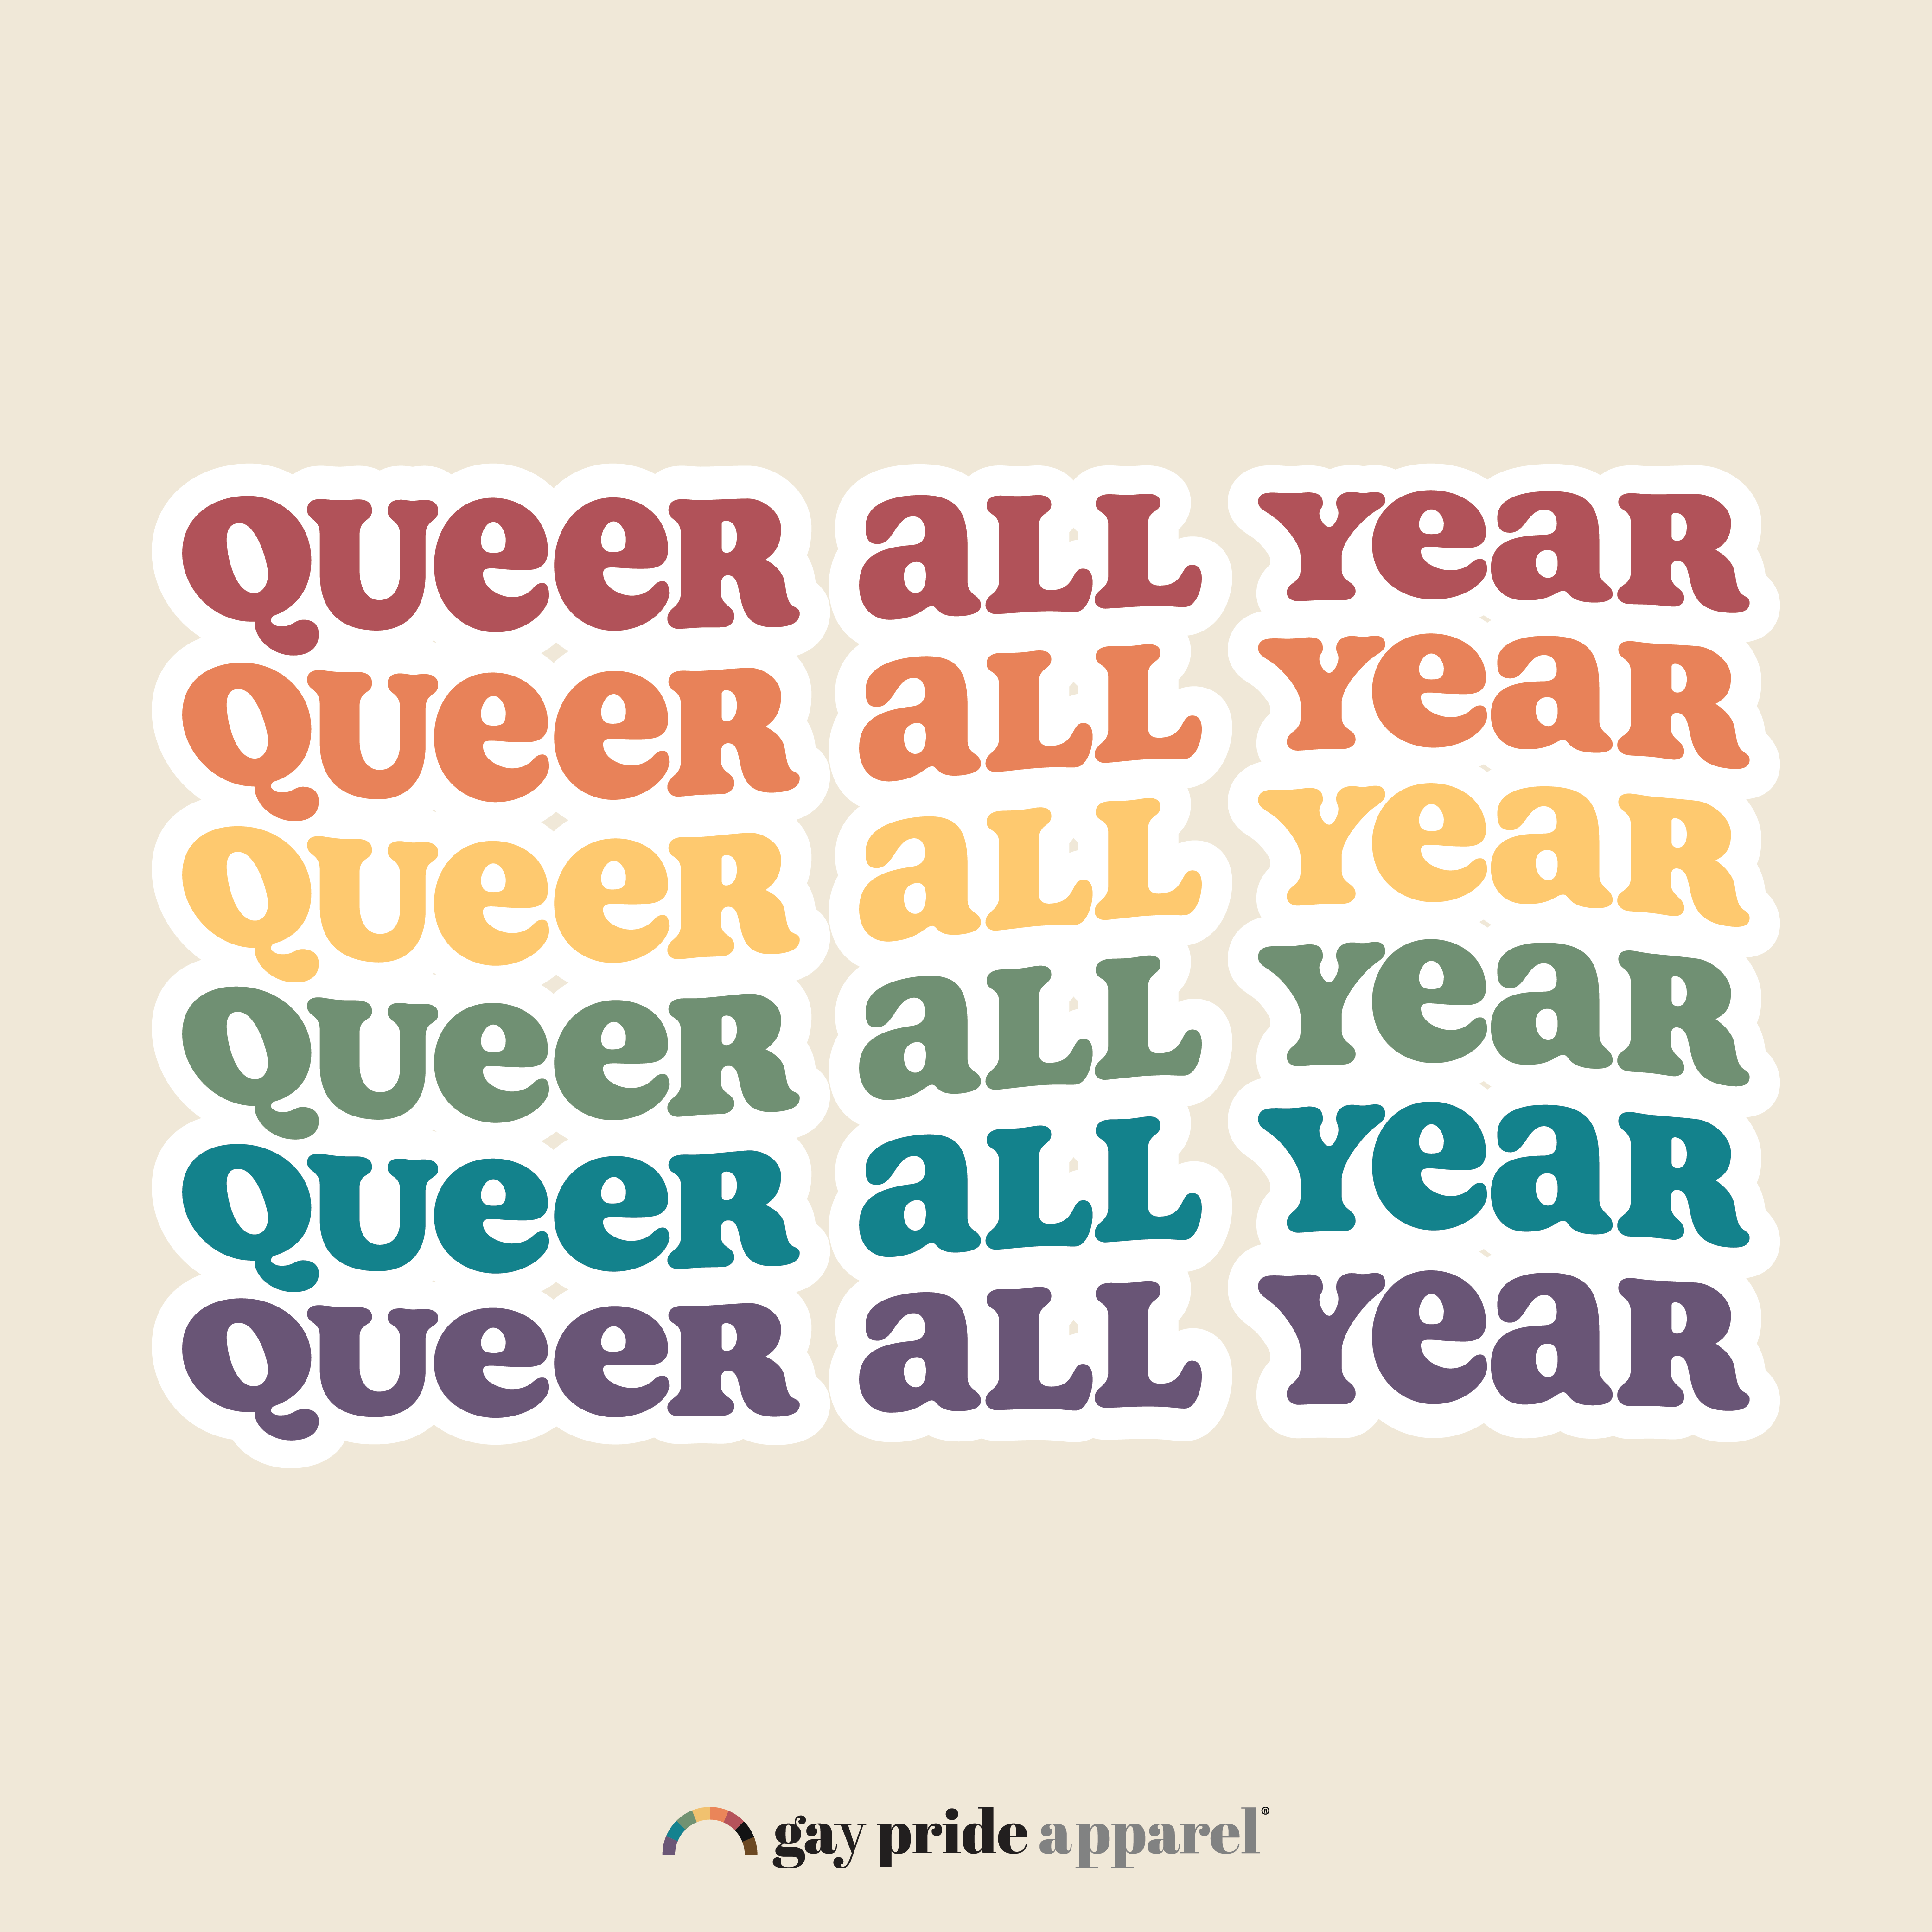 What is the history of the word Queer?